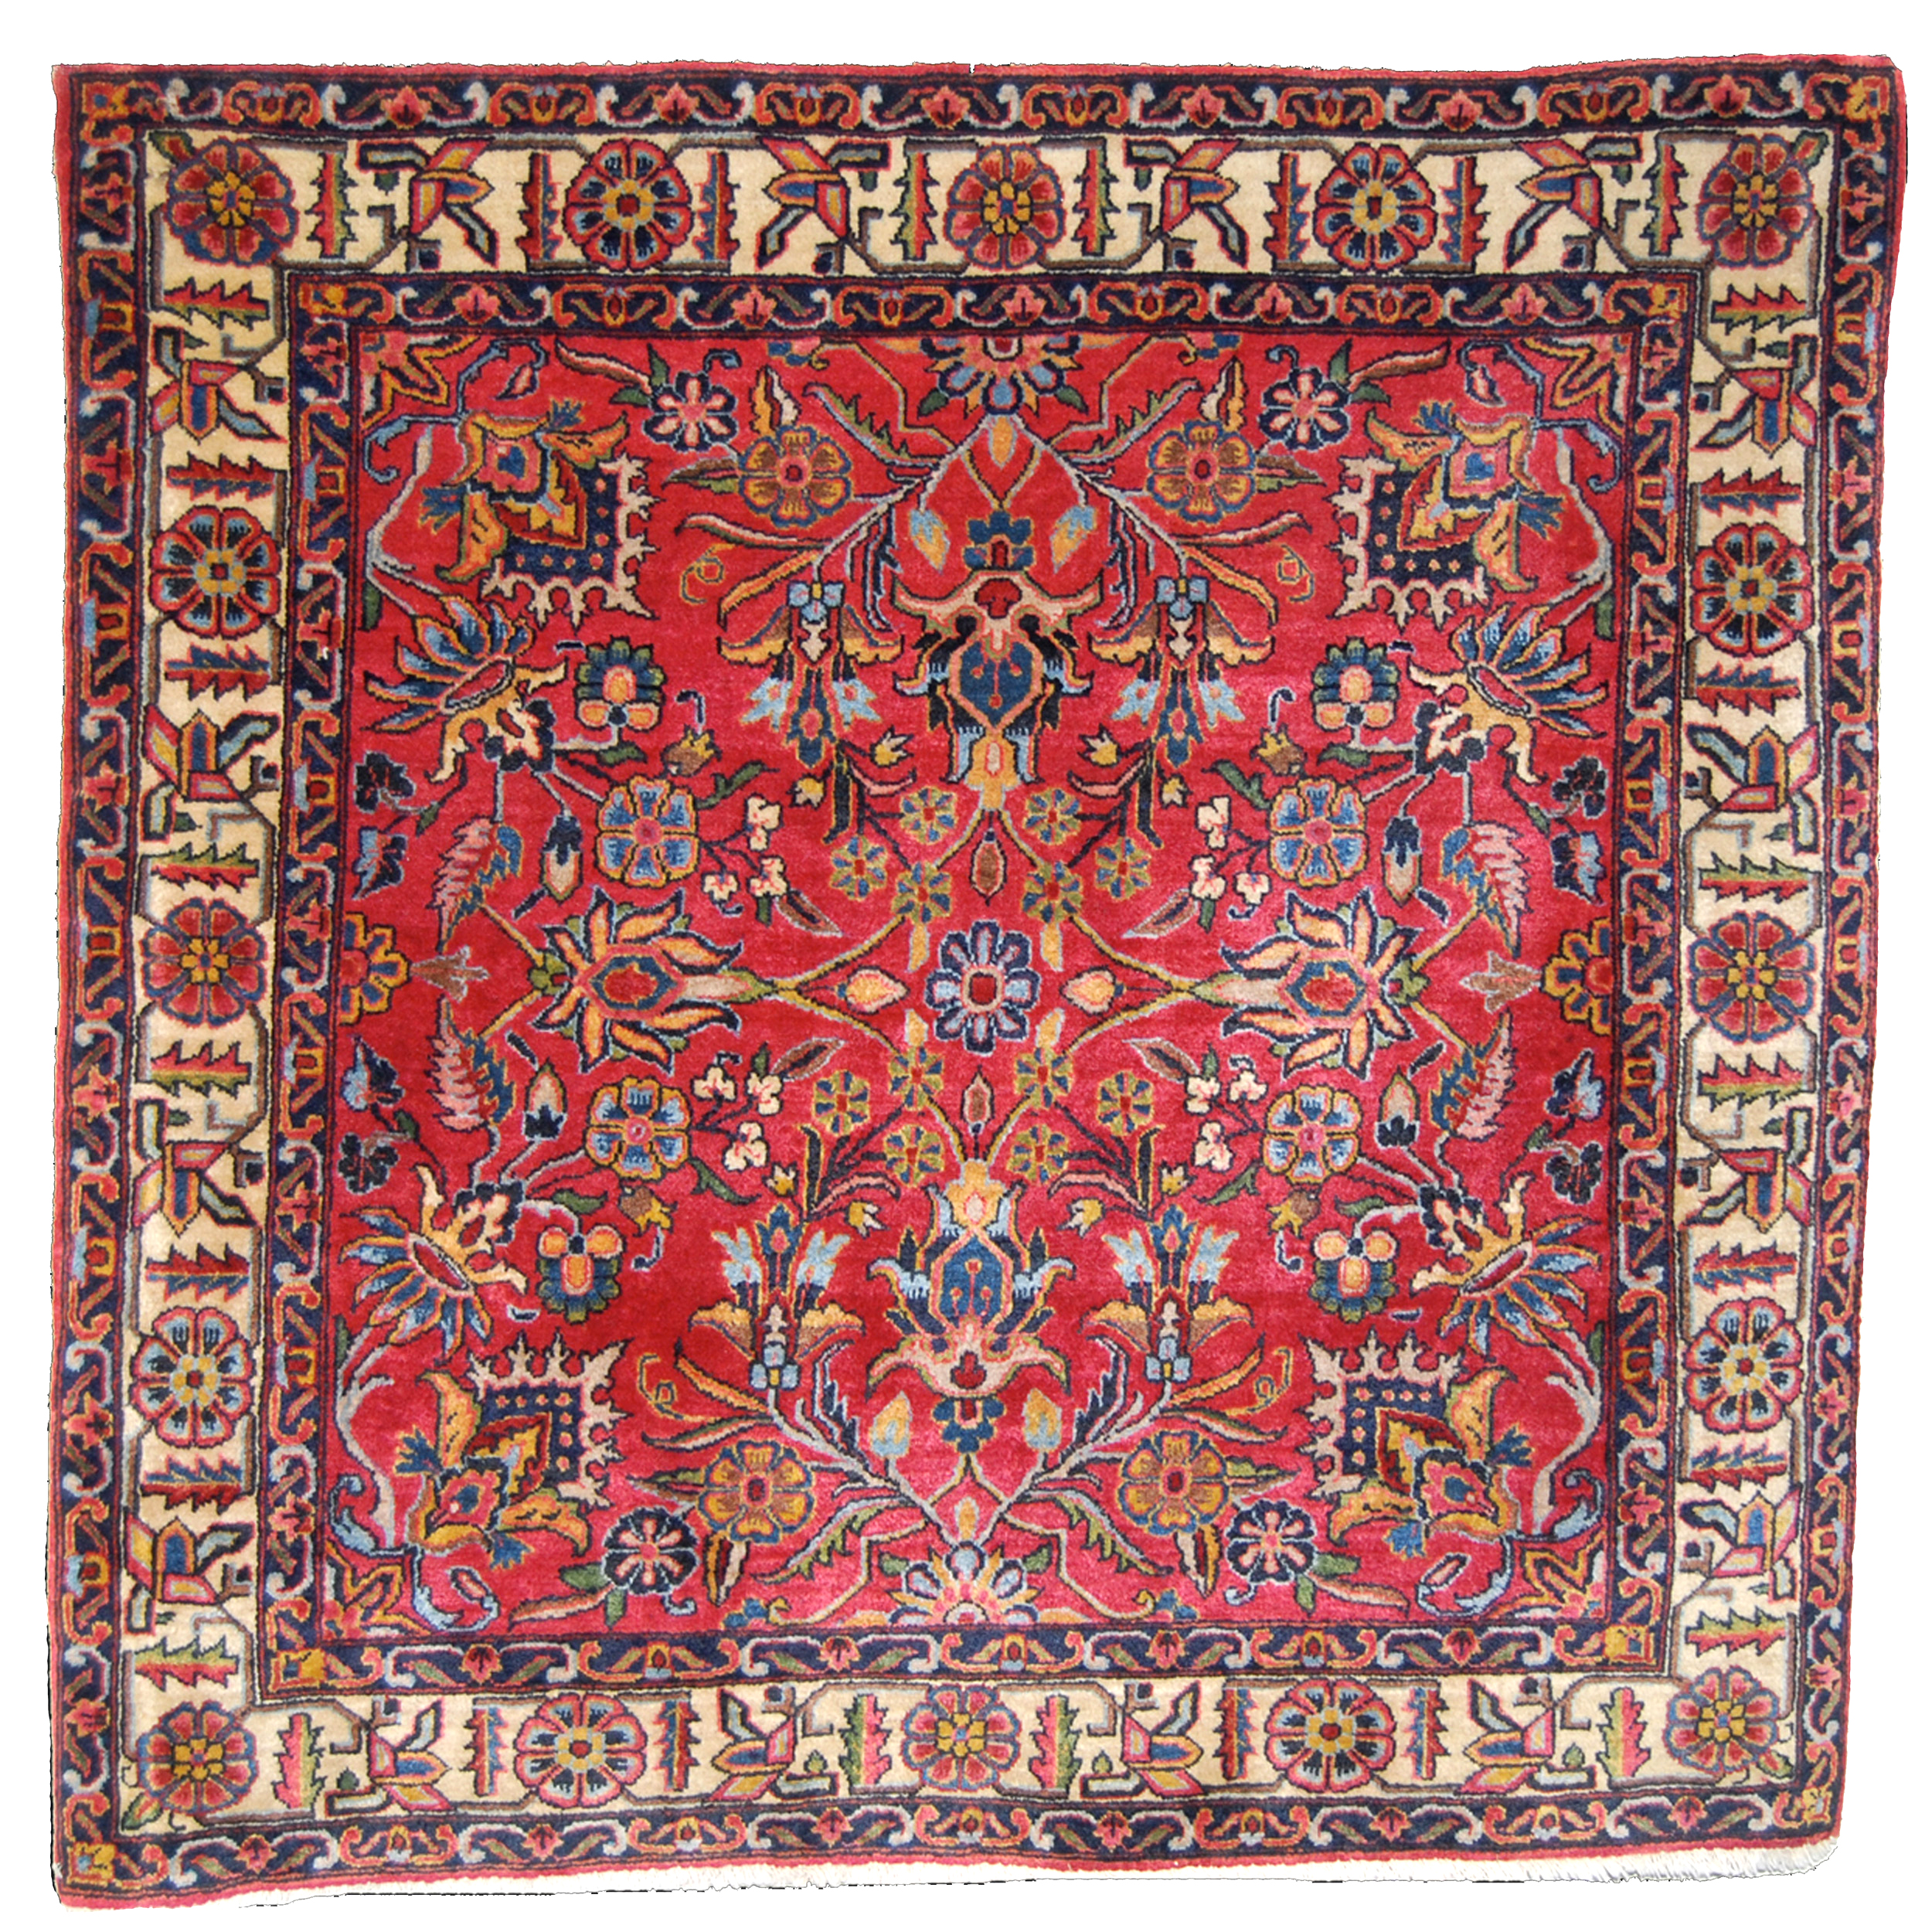 Antique Sarouk rug of the type sometimes referred to as a "Ghiassabad" Sarouk rug. Douglas Stock Gallery Antique Oriental Rug Research Archives